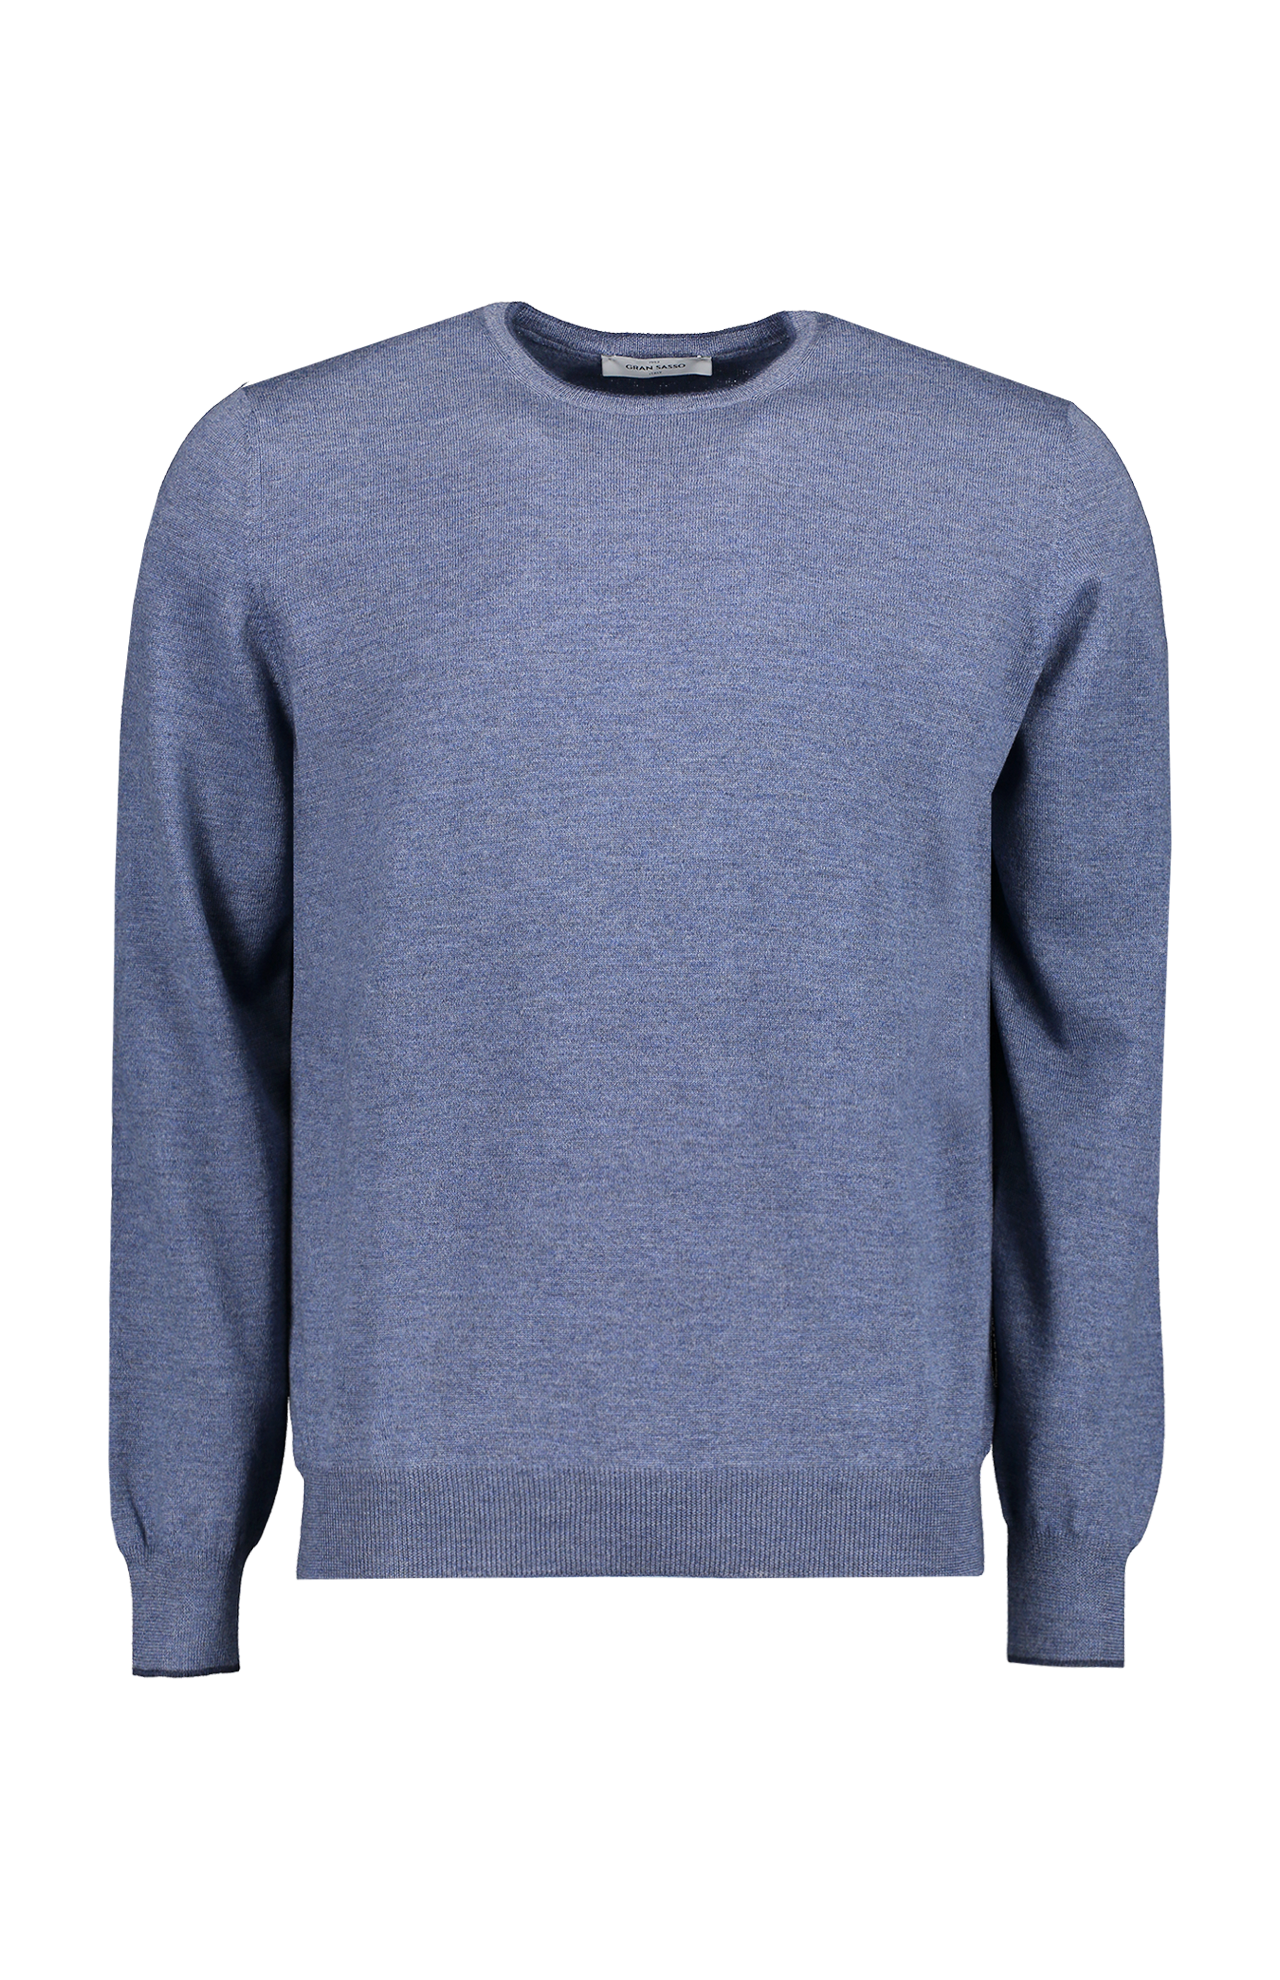 Gran Sasso Tipping Crewneck Sweater Steel Blue Front Mannequin Image (6897540923507)